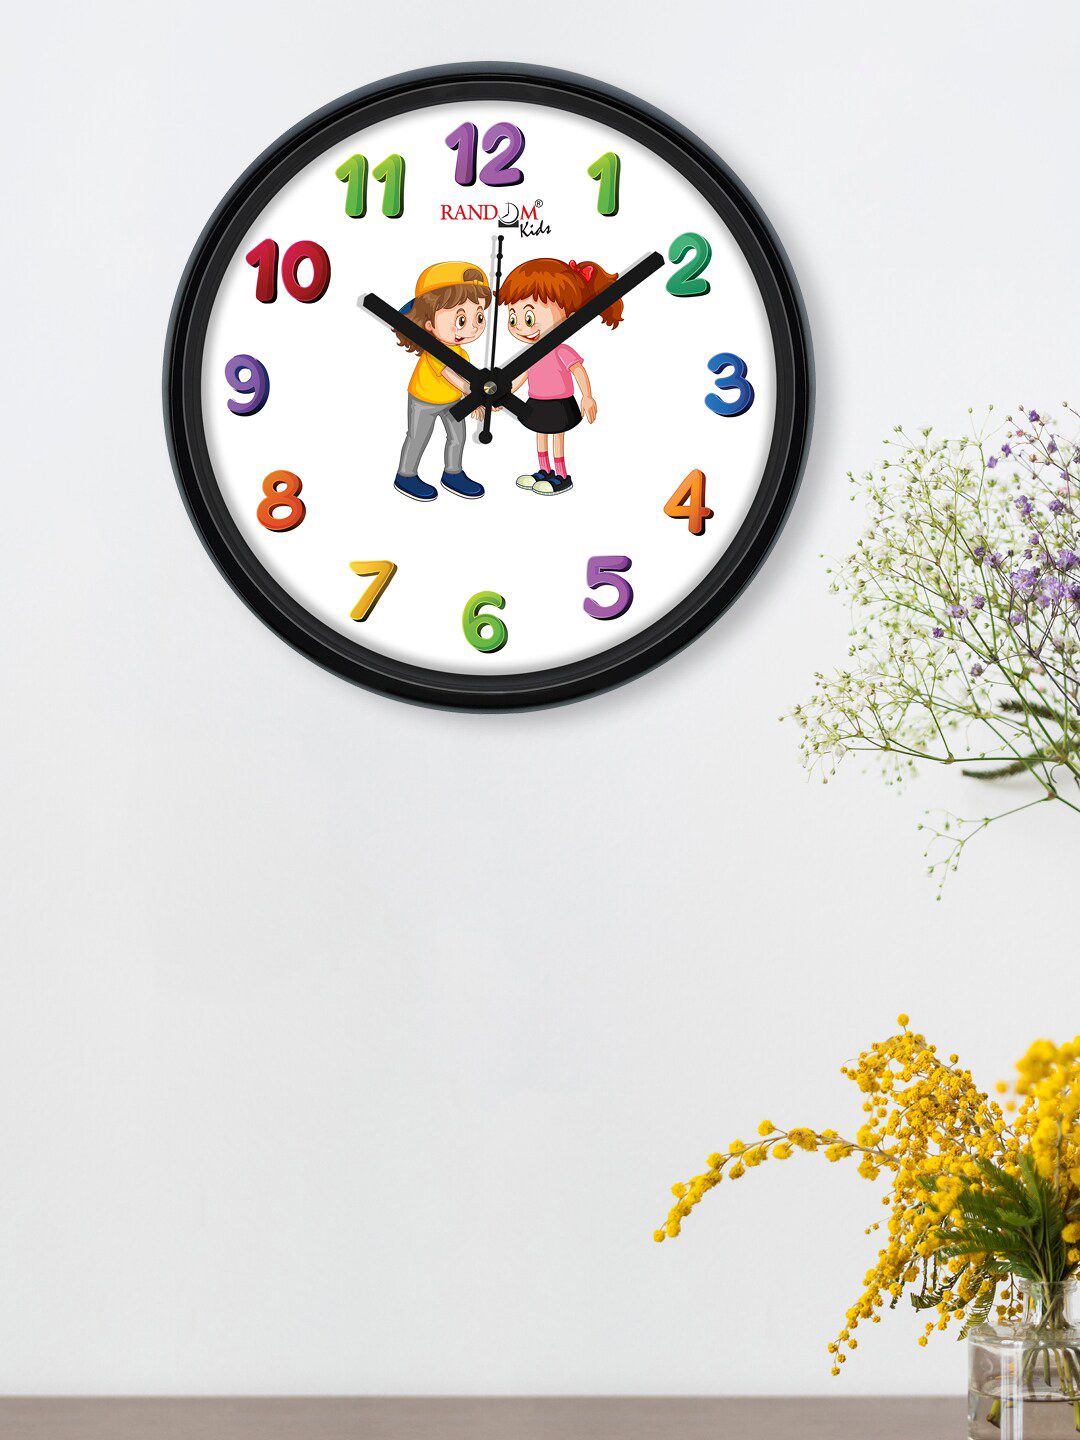 RANDOM White & Pink Printed Contemporary Wall Clock Price in India